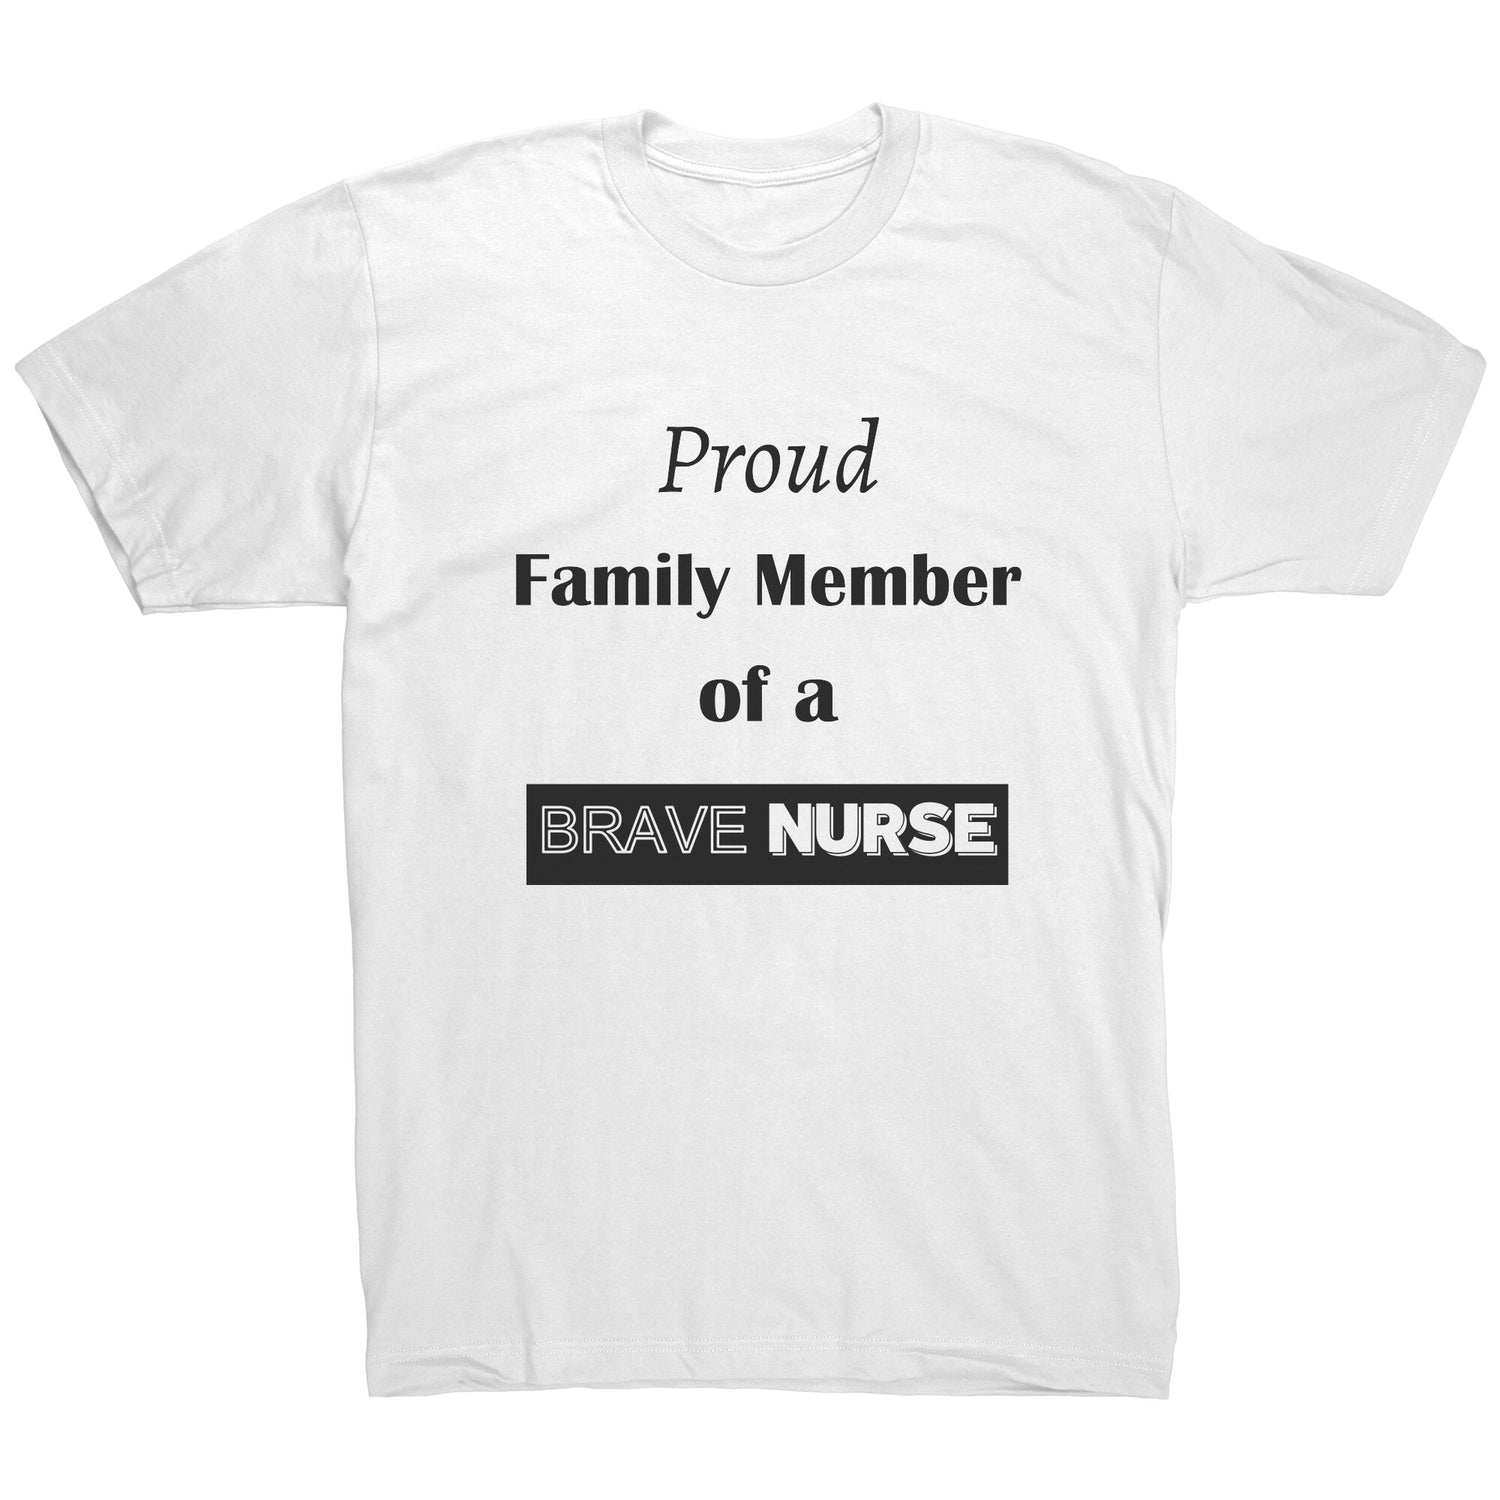 Proud Family Member of a Brave Nurse Lettering Mens Shirt - Signs and Seasons Gifts